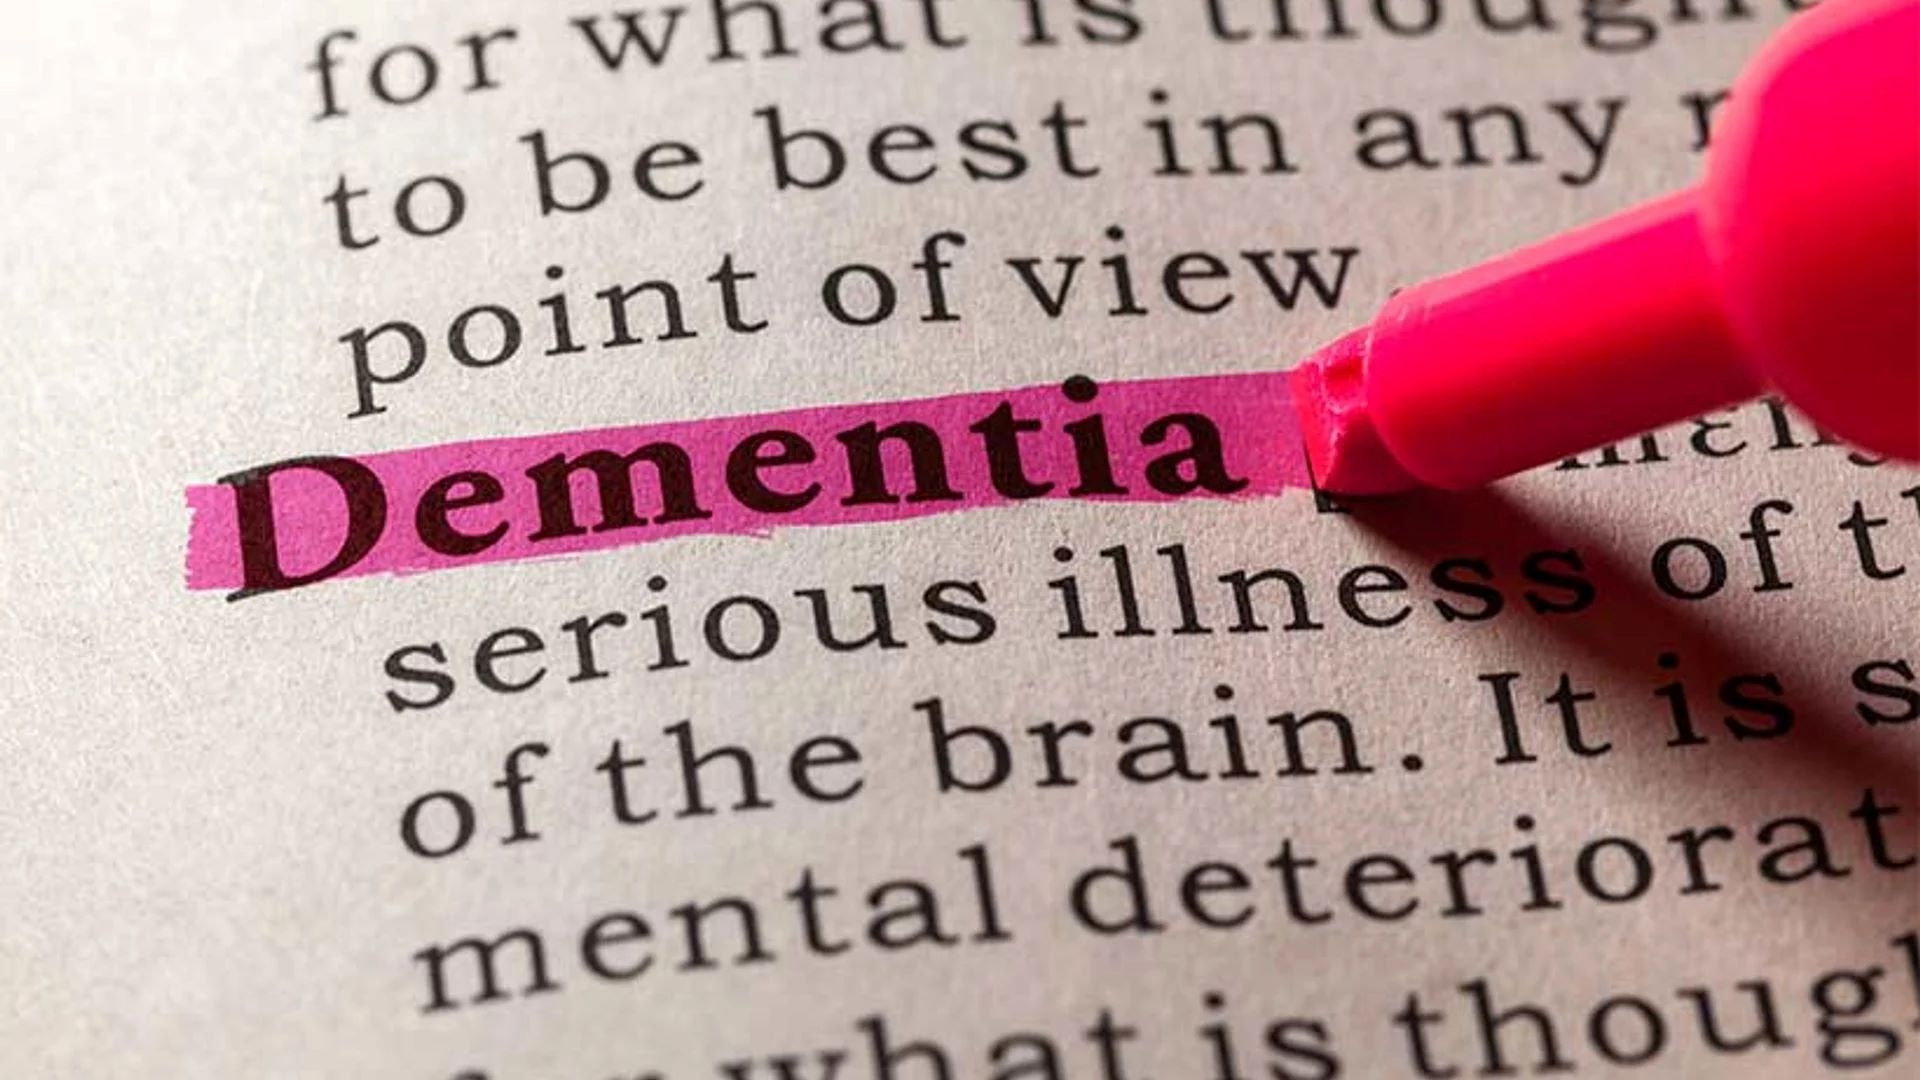 11-facts-about-dementia-awareness-week-may-13th-to-may-19th